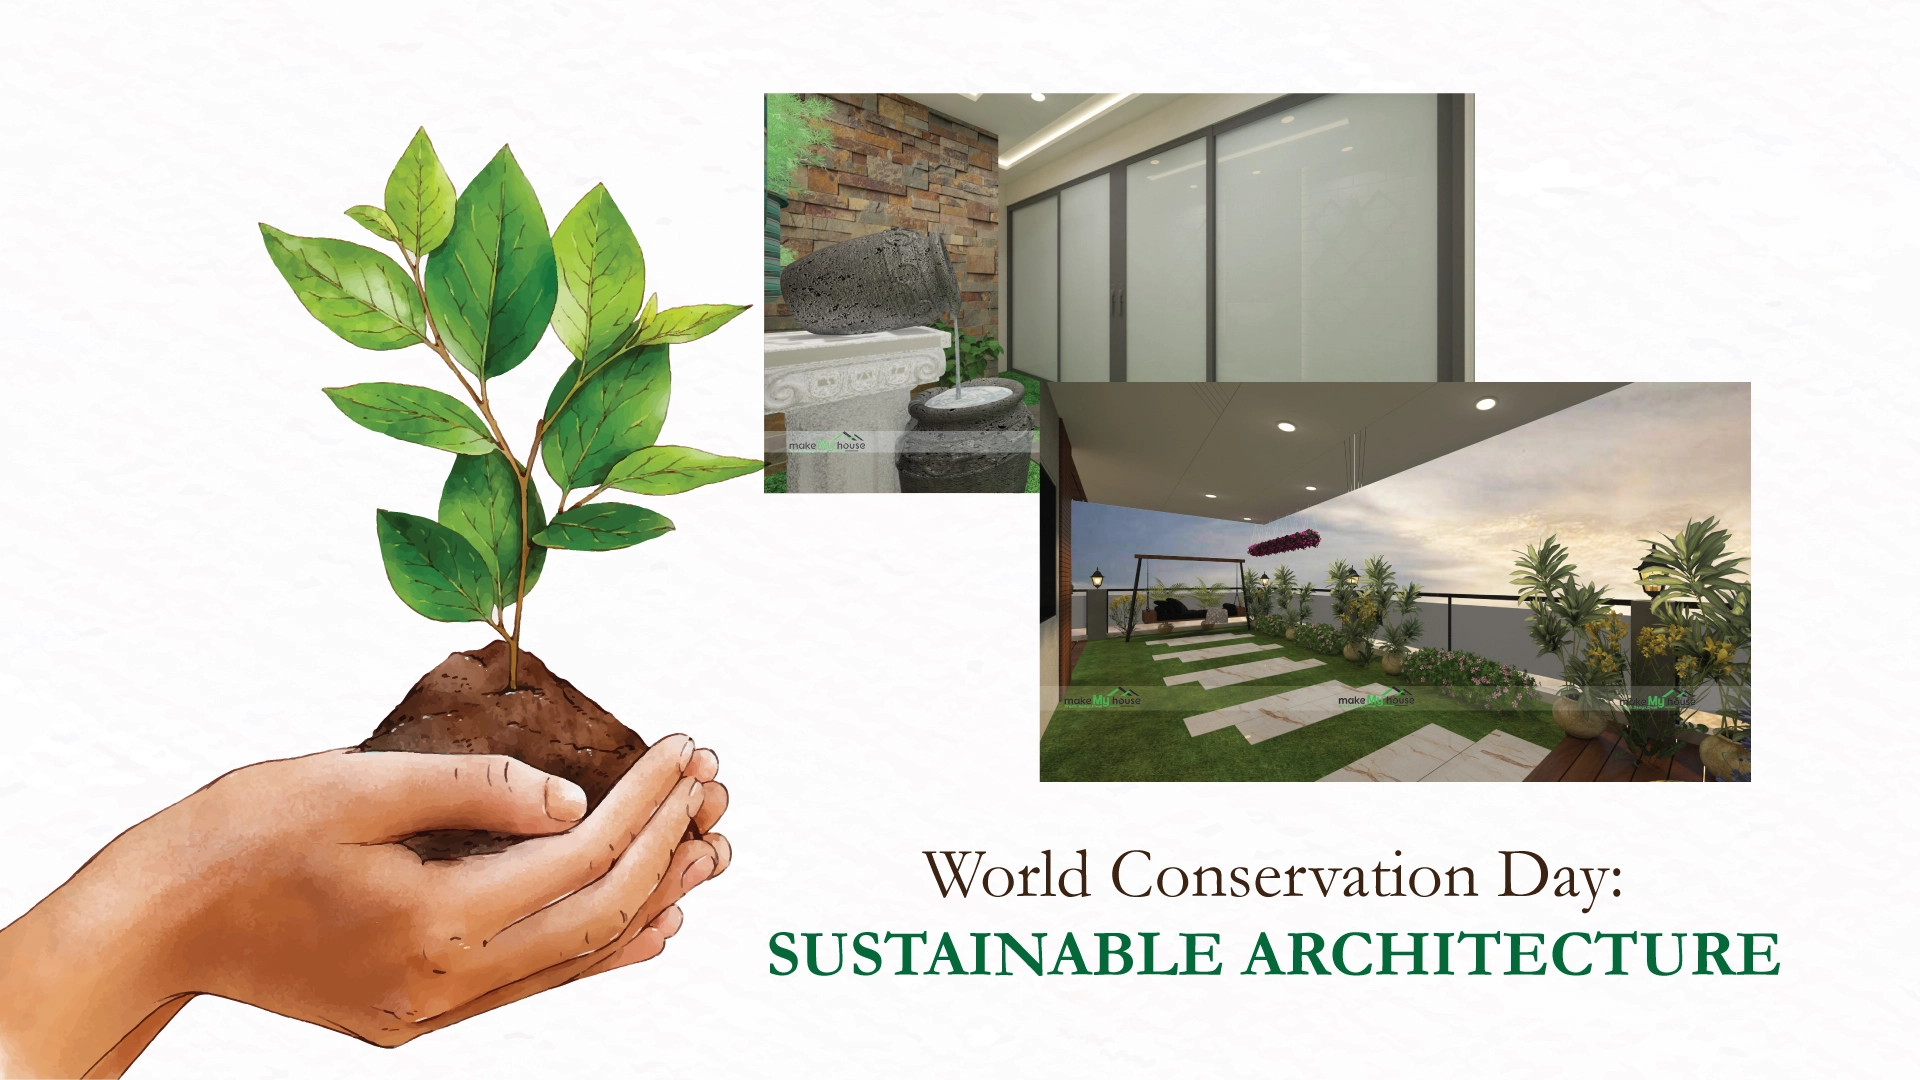 world nature conservation day